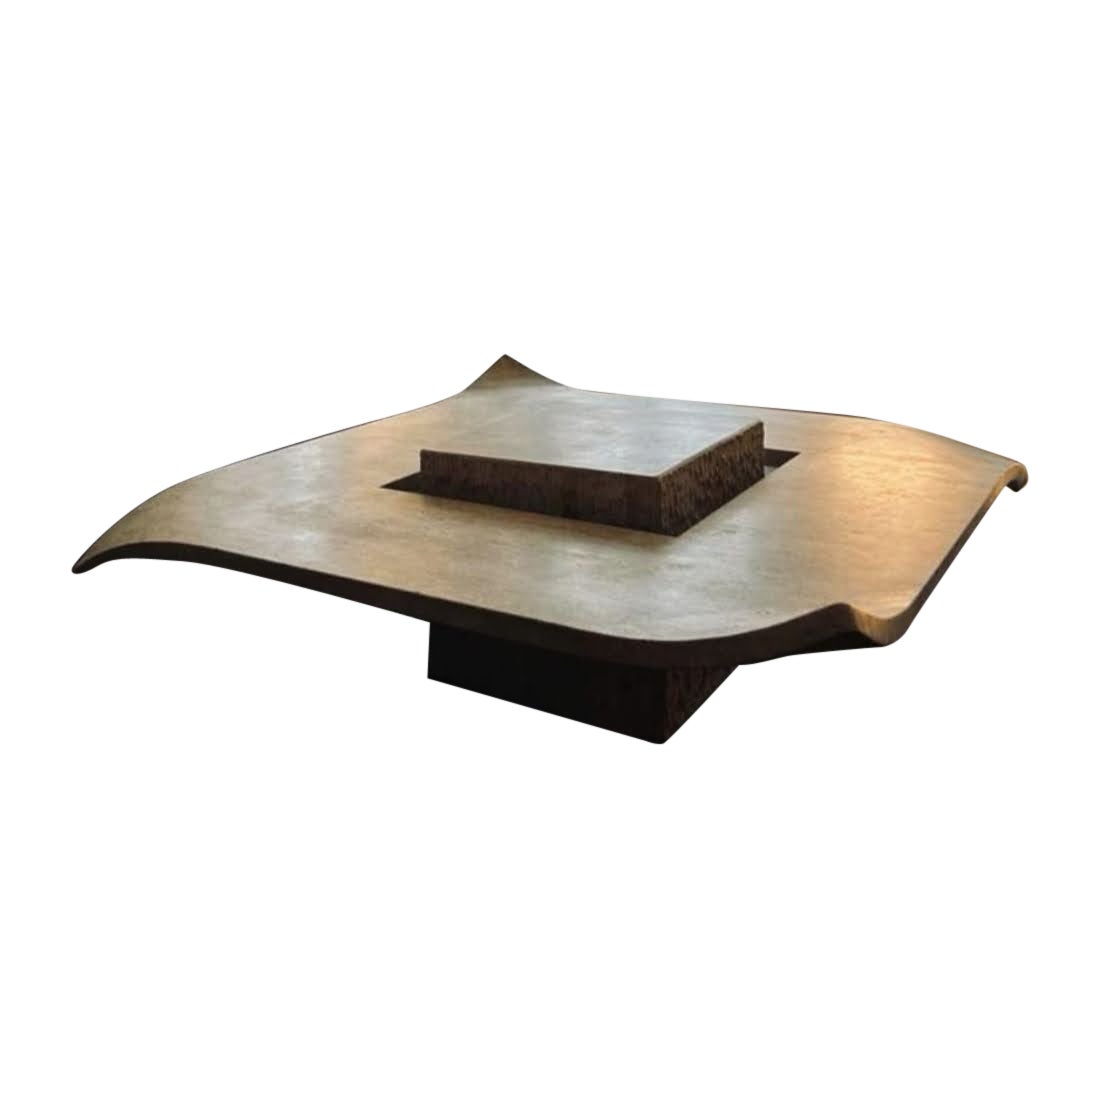 Italian Coffee Table White Travertine with Floating Top 70s, Minimalist &Design